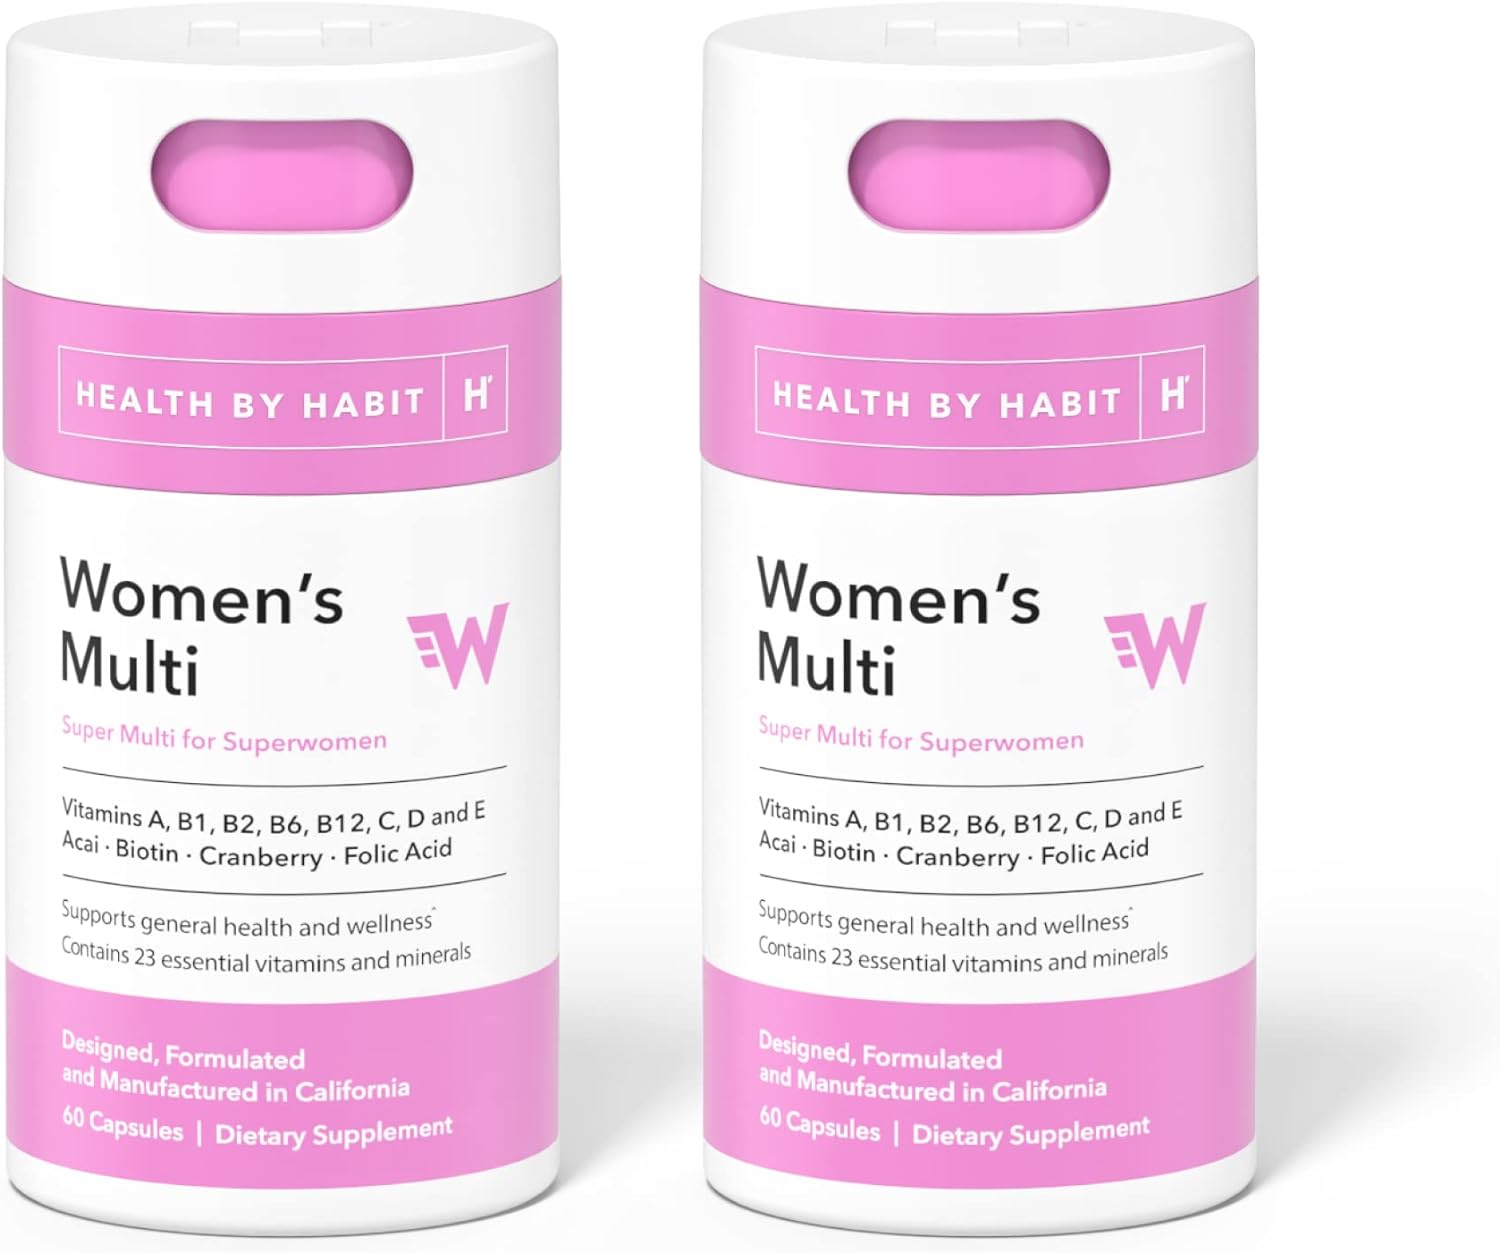 Health By Habit Womens Multi Supplement (60 Capsules) - 23 Essential Vitamins and Minerals, Supports General Health Wellness, Non-GMO, Sugar Free (1 Pack)